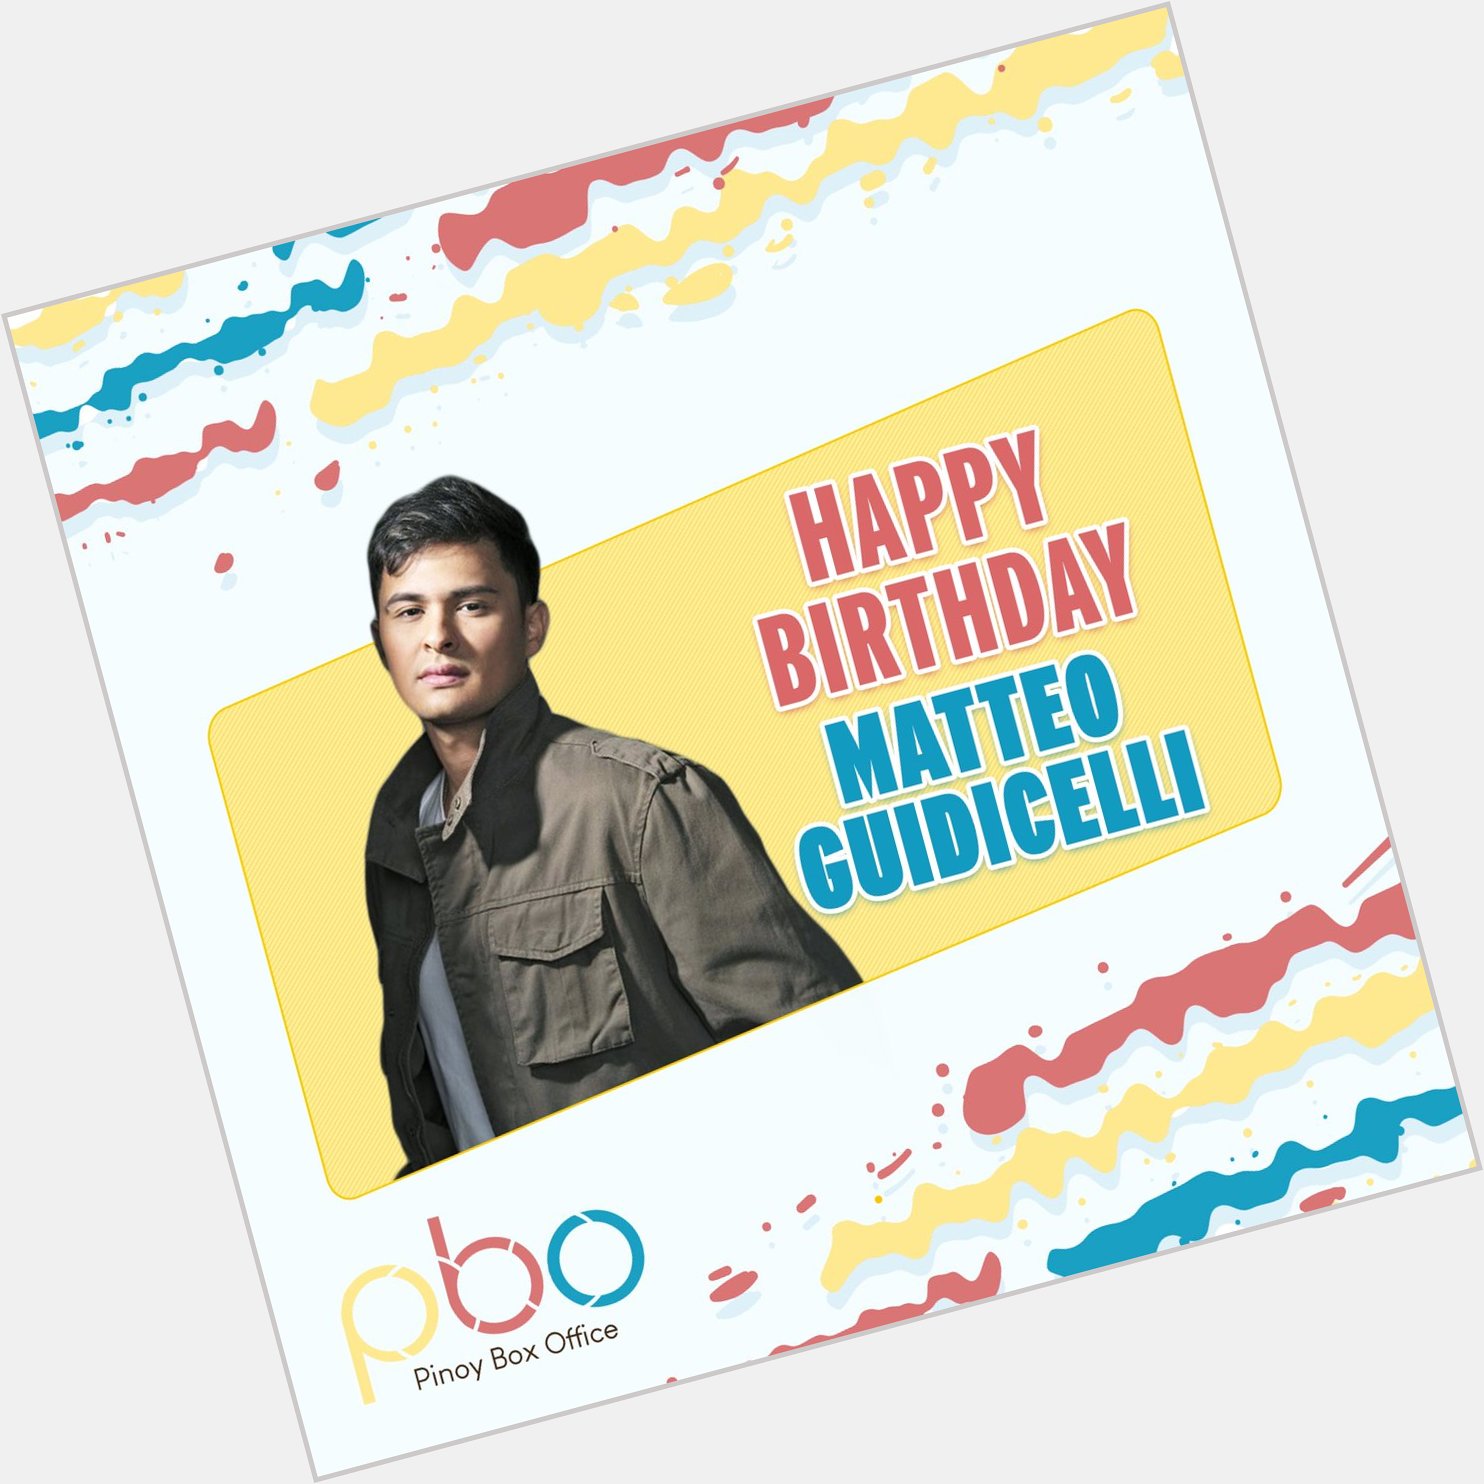 Happy birthday, Matteo Guidicelli! Wishing you a day filled with happiness and love! 